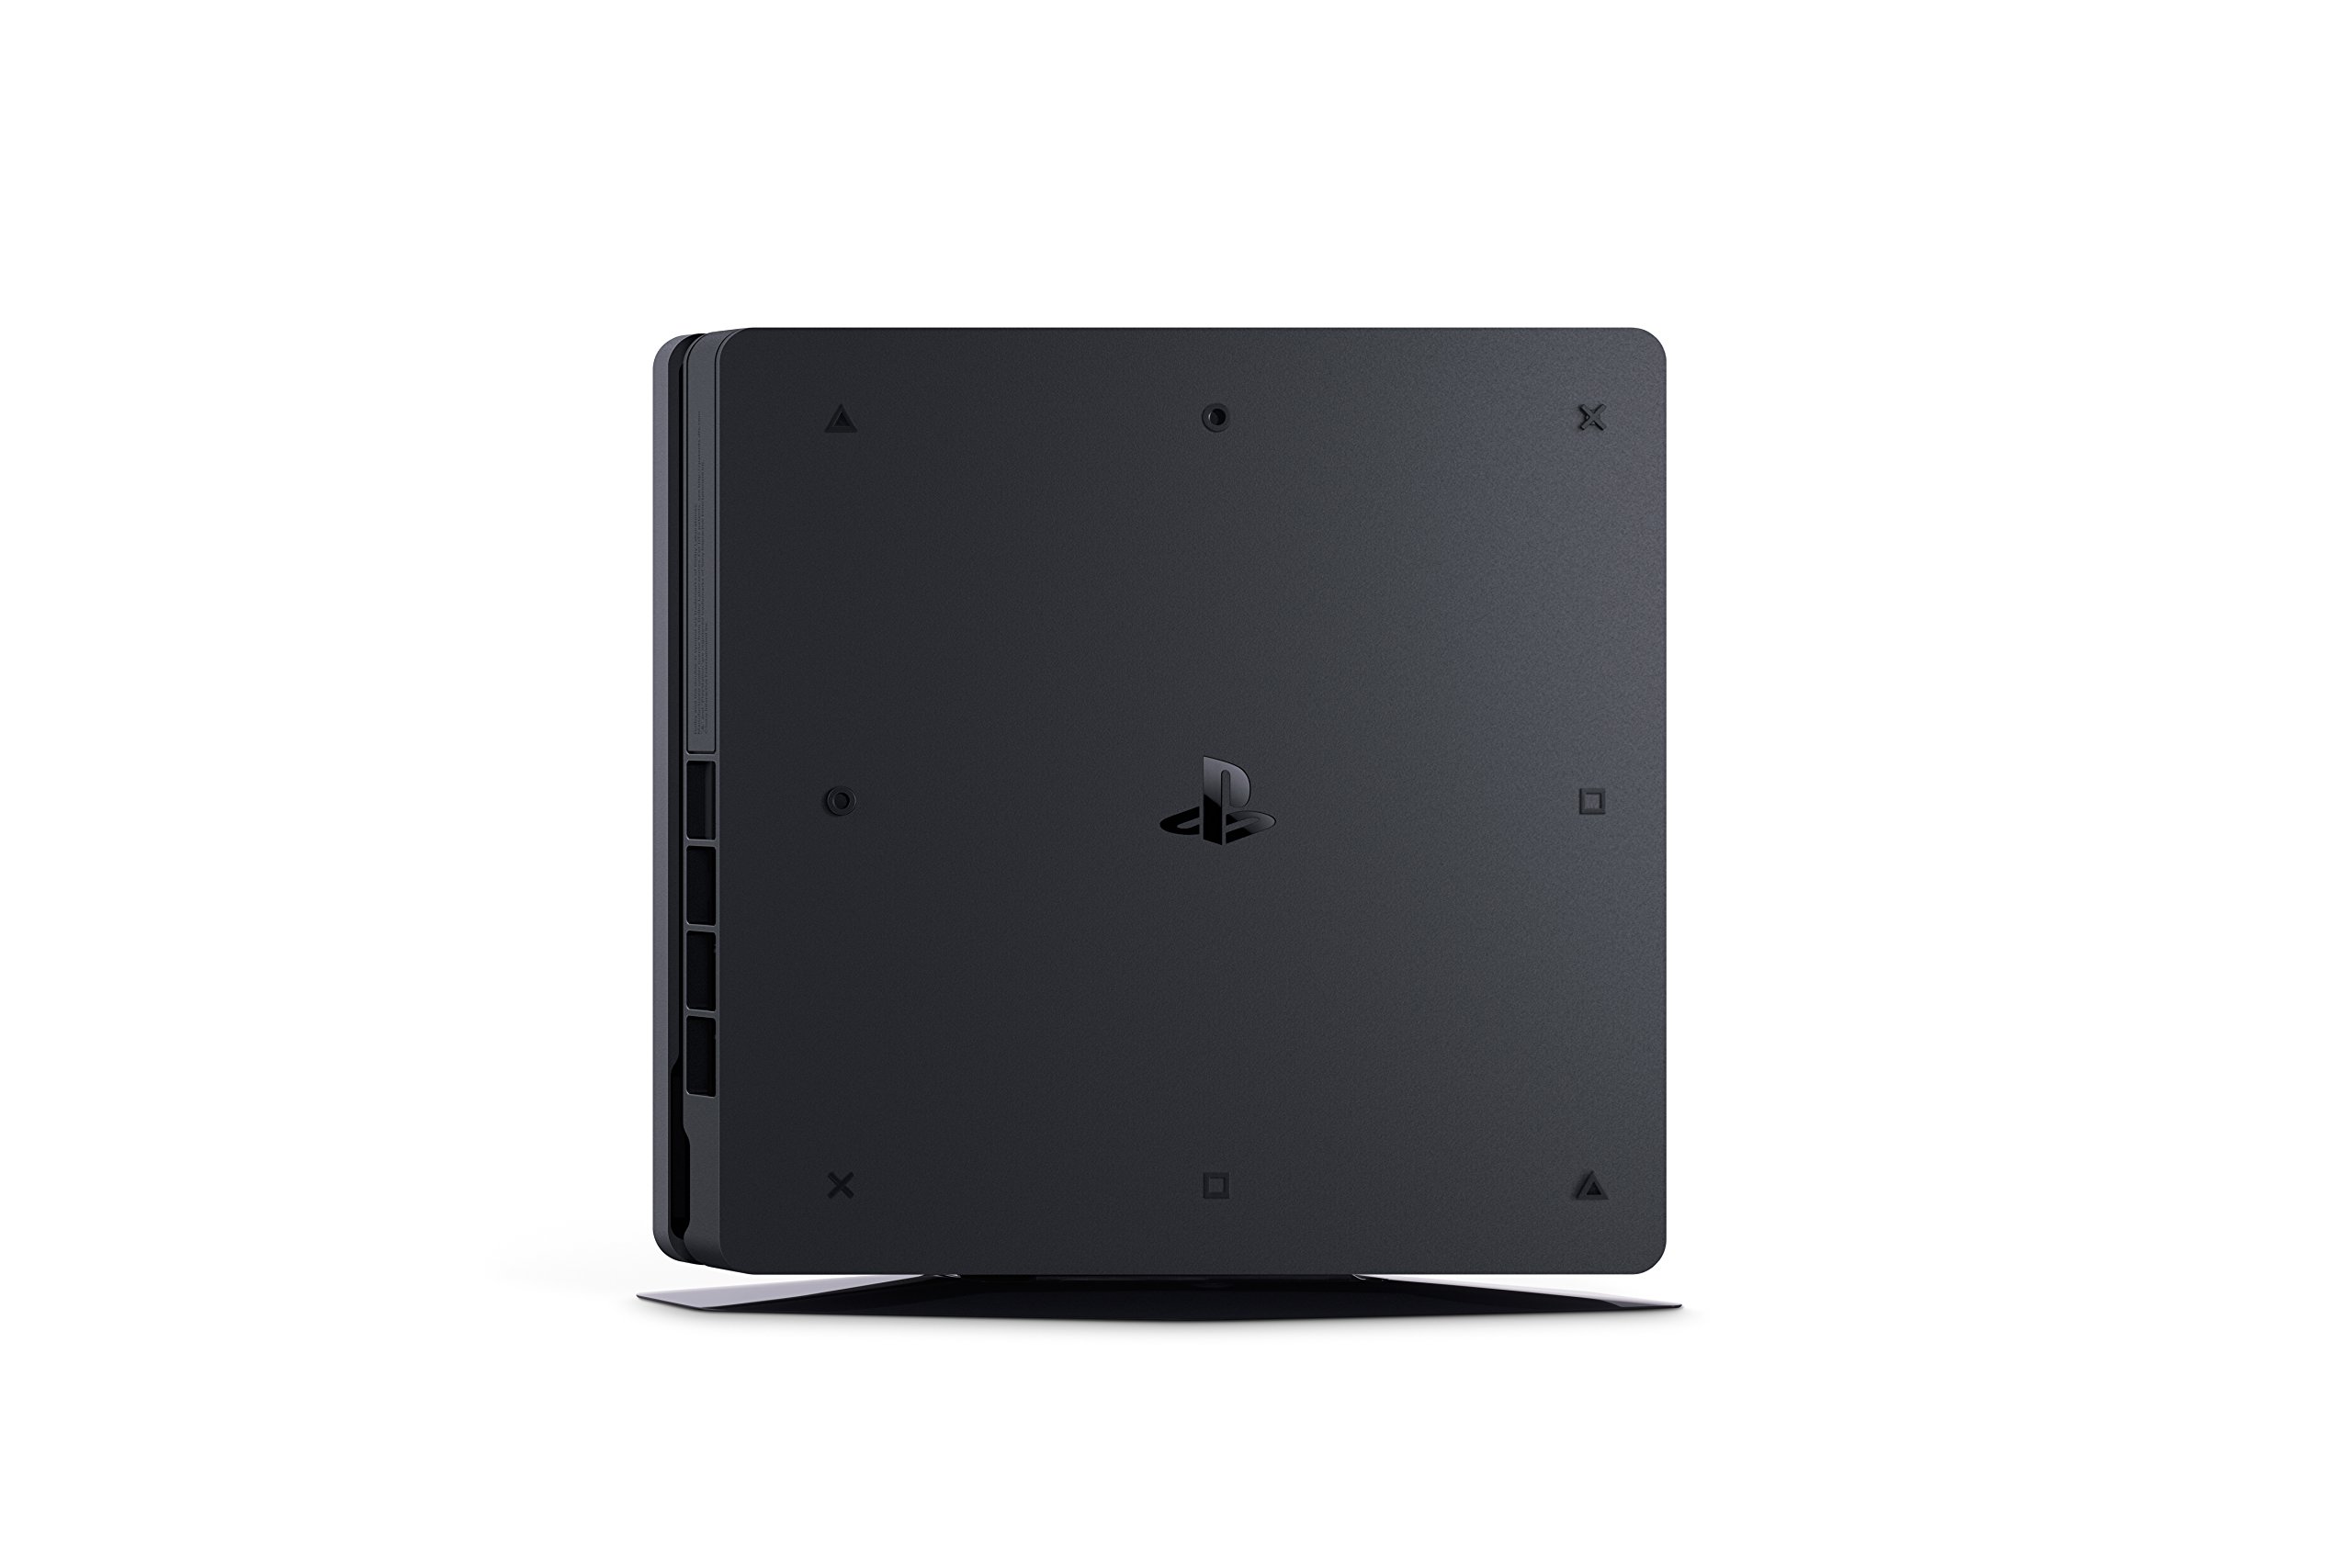 playstation 4 slim 1tb console - image 5 of 7